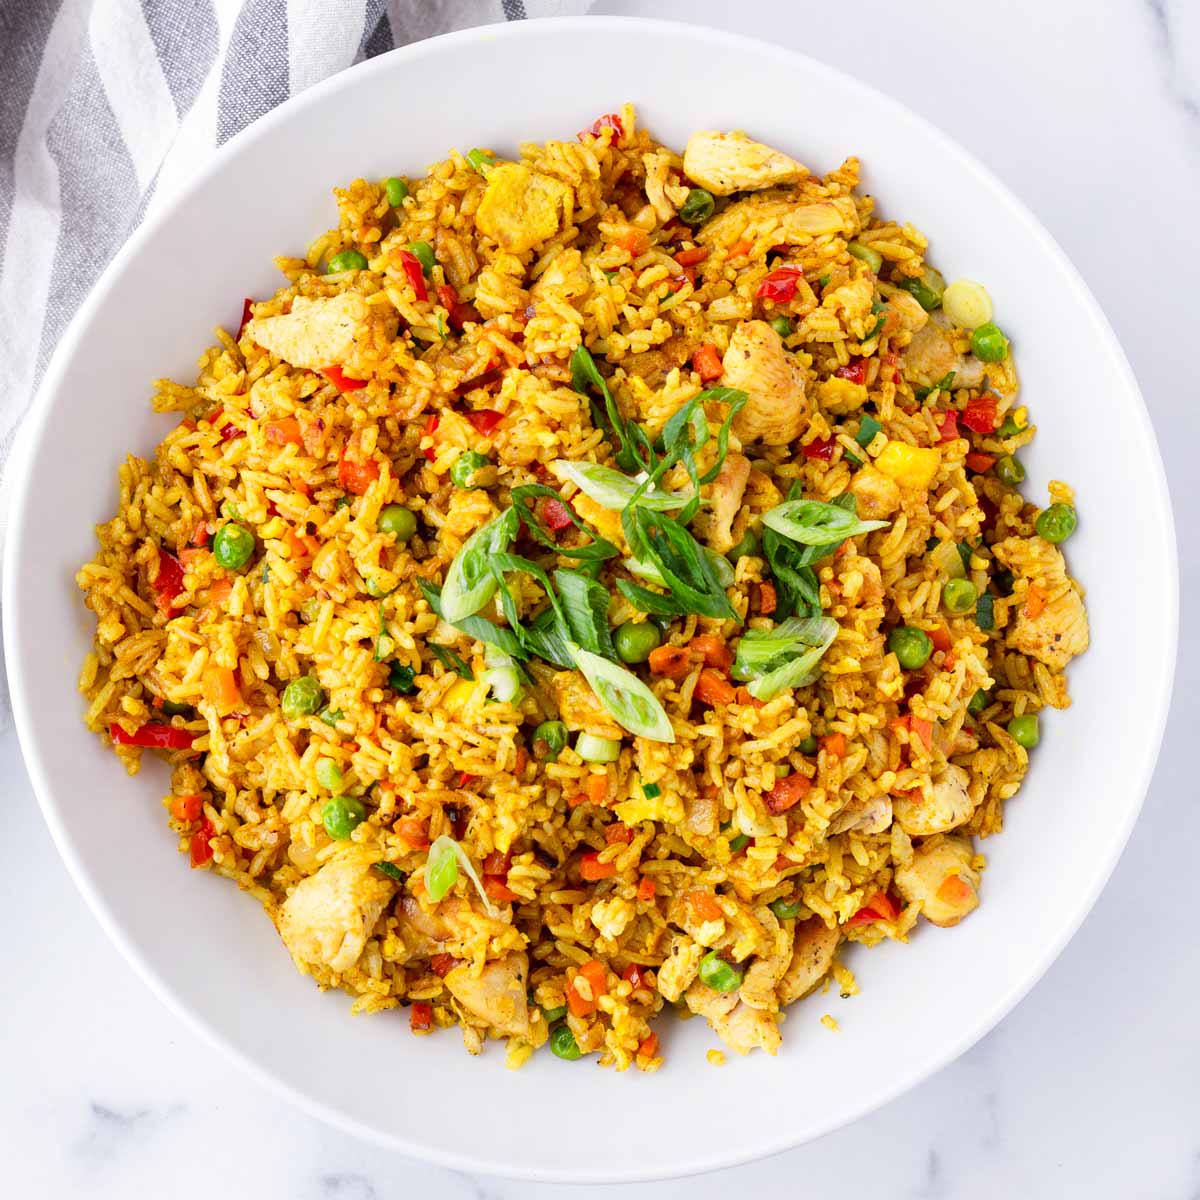 https://cookingformysoul.com/wp-content/uploads/2022/03/curry-fried-rice-feat-min.jpg